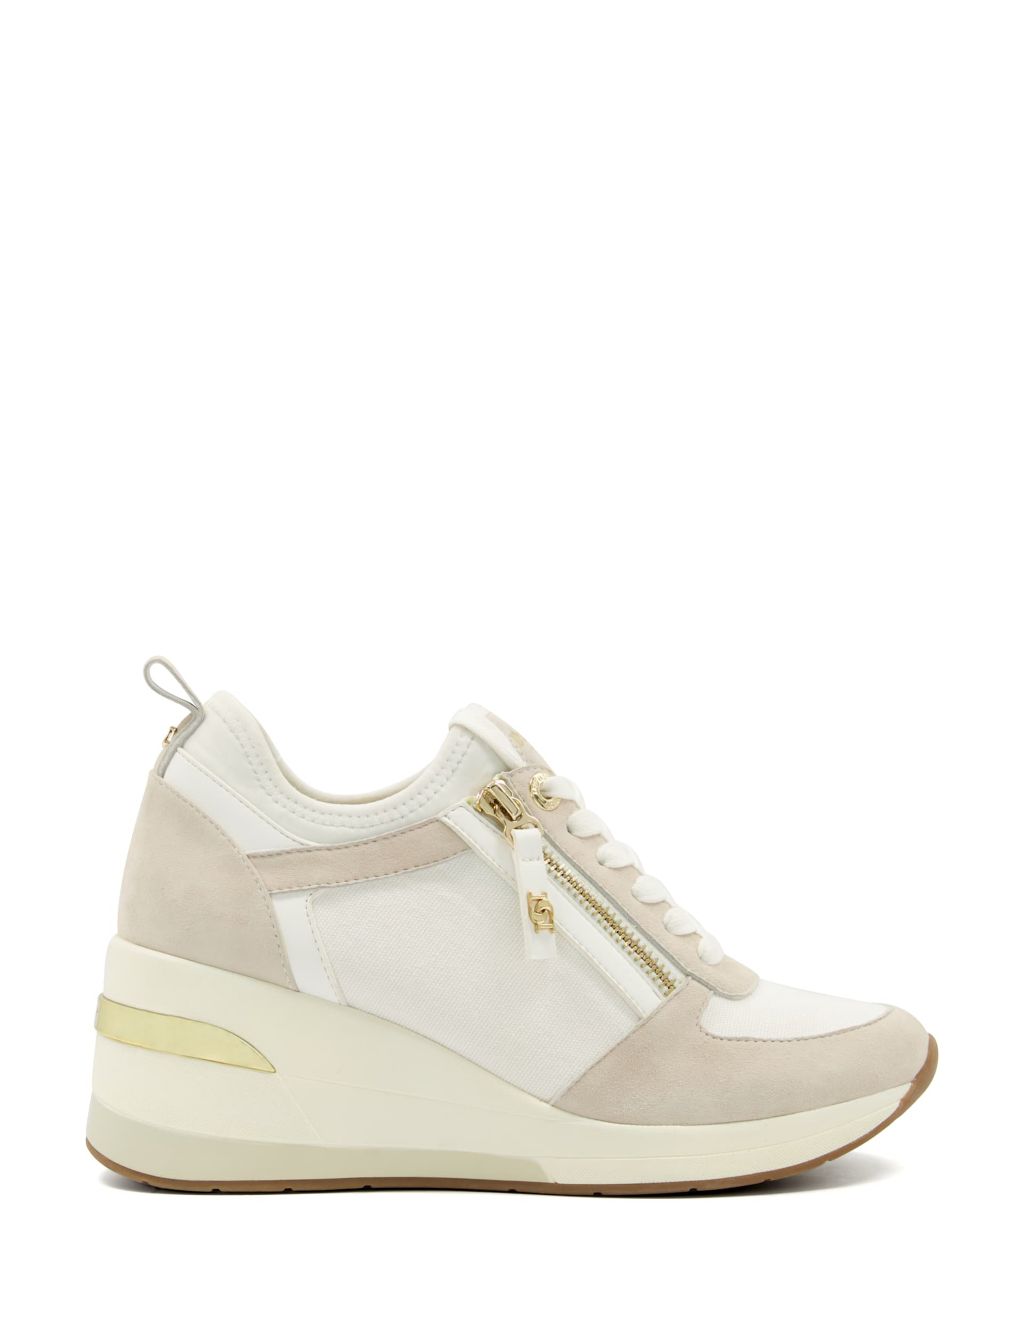 Leather Wedge Suede Panel Trainers image 1